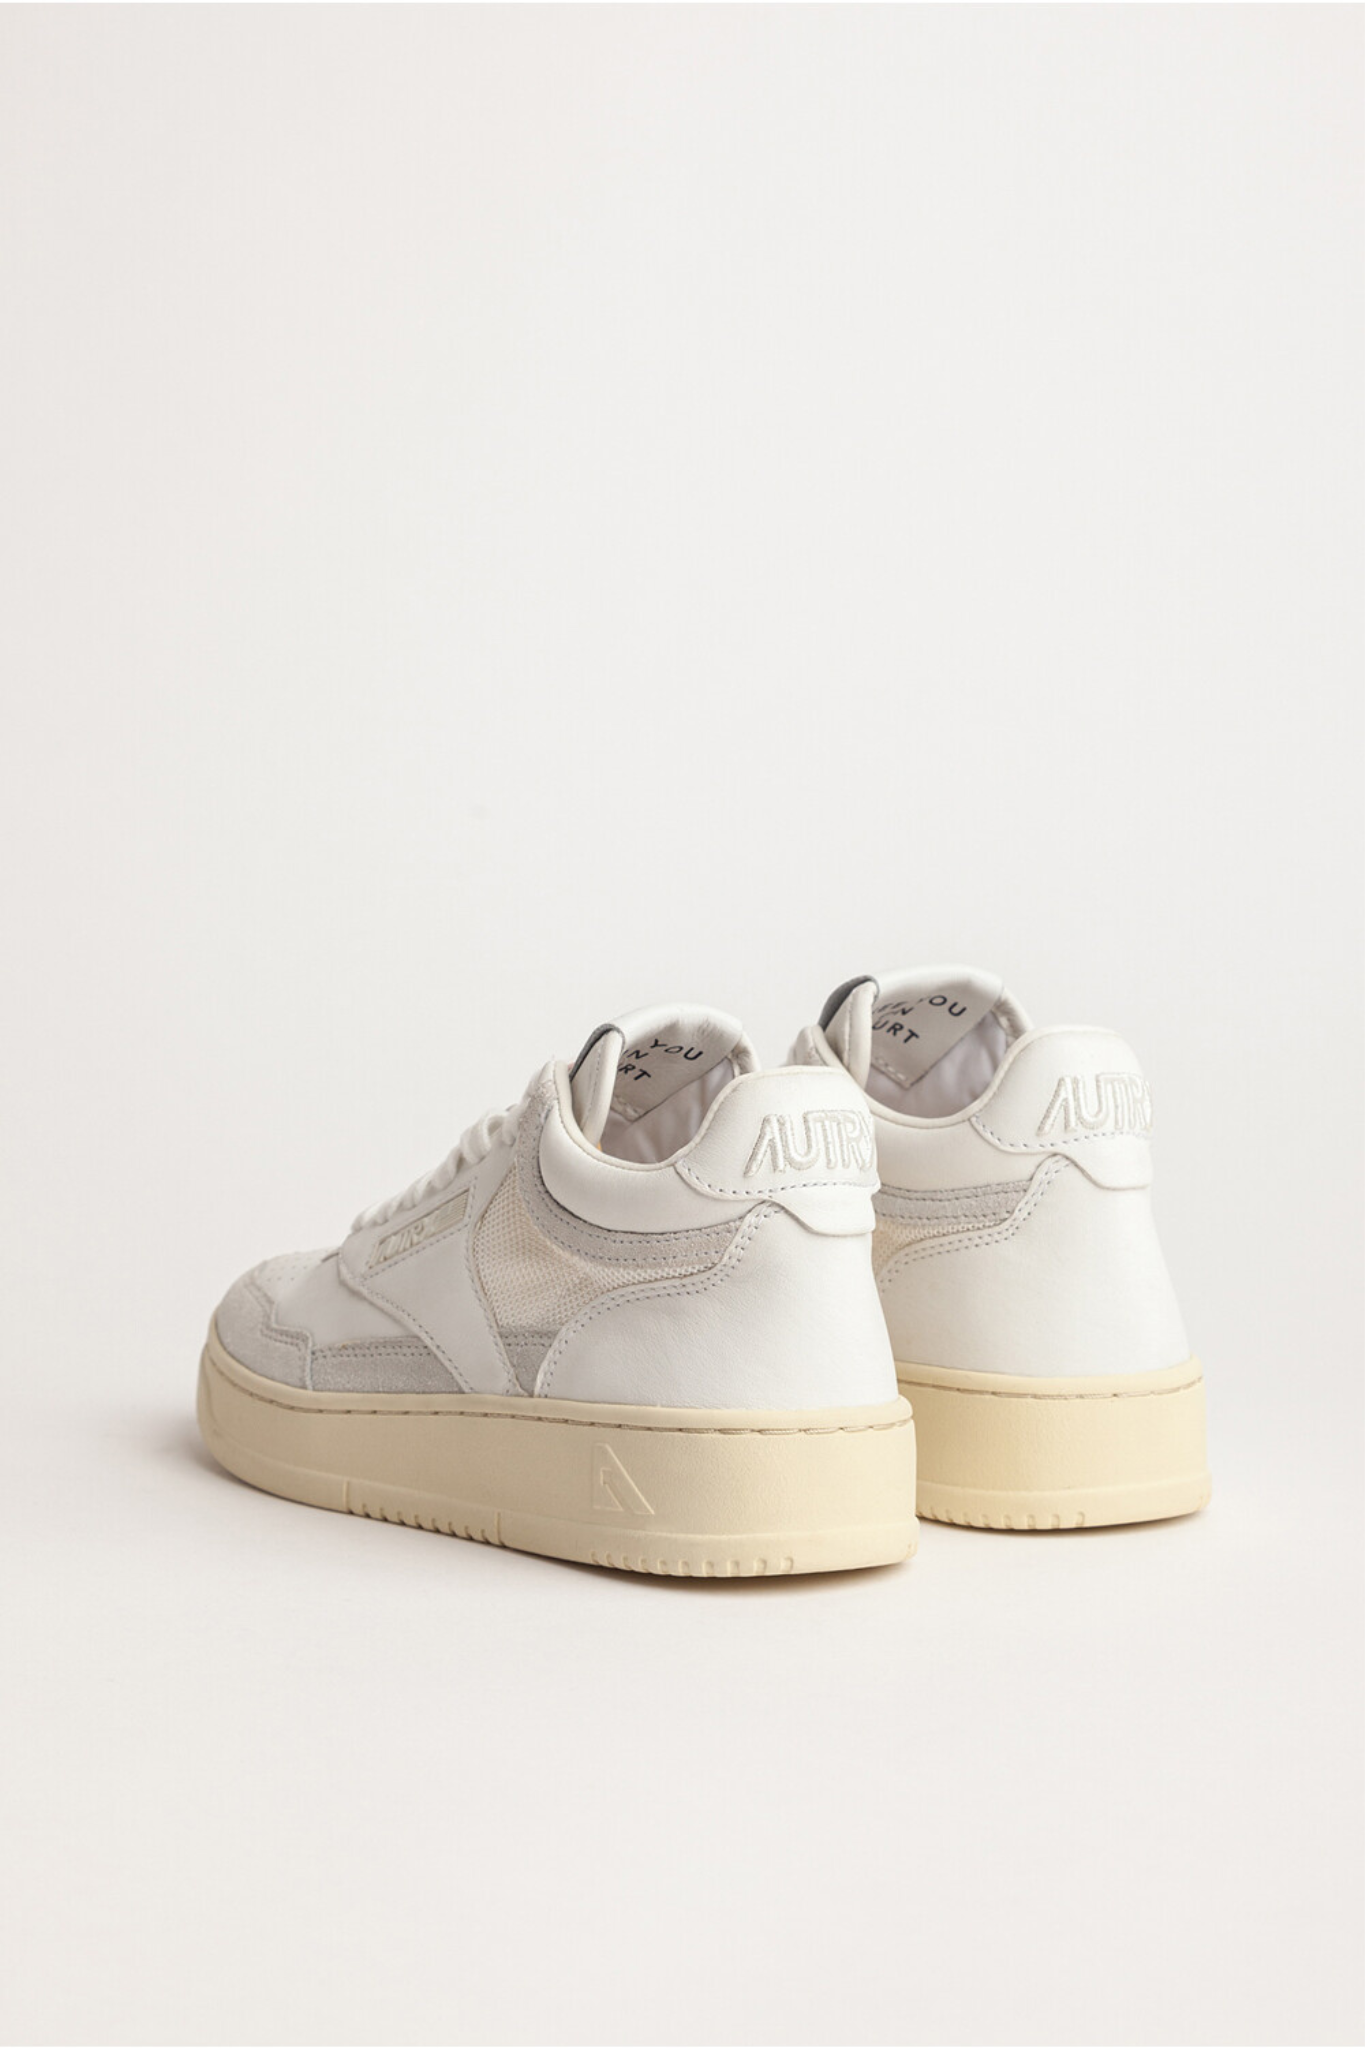 AOMM-CE11 - OPEN MID-TOP SNEAKERS IN LEATHER, MESH AND SUEDE COLOR WHITE